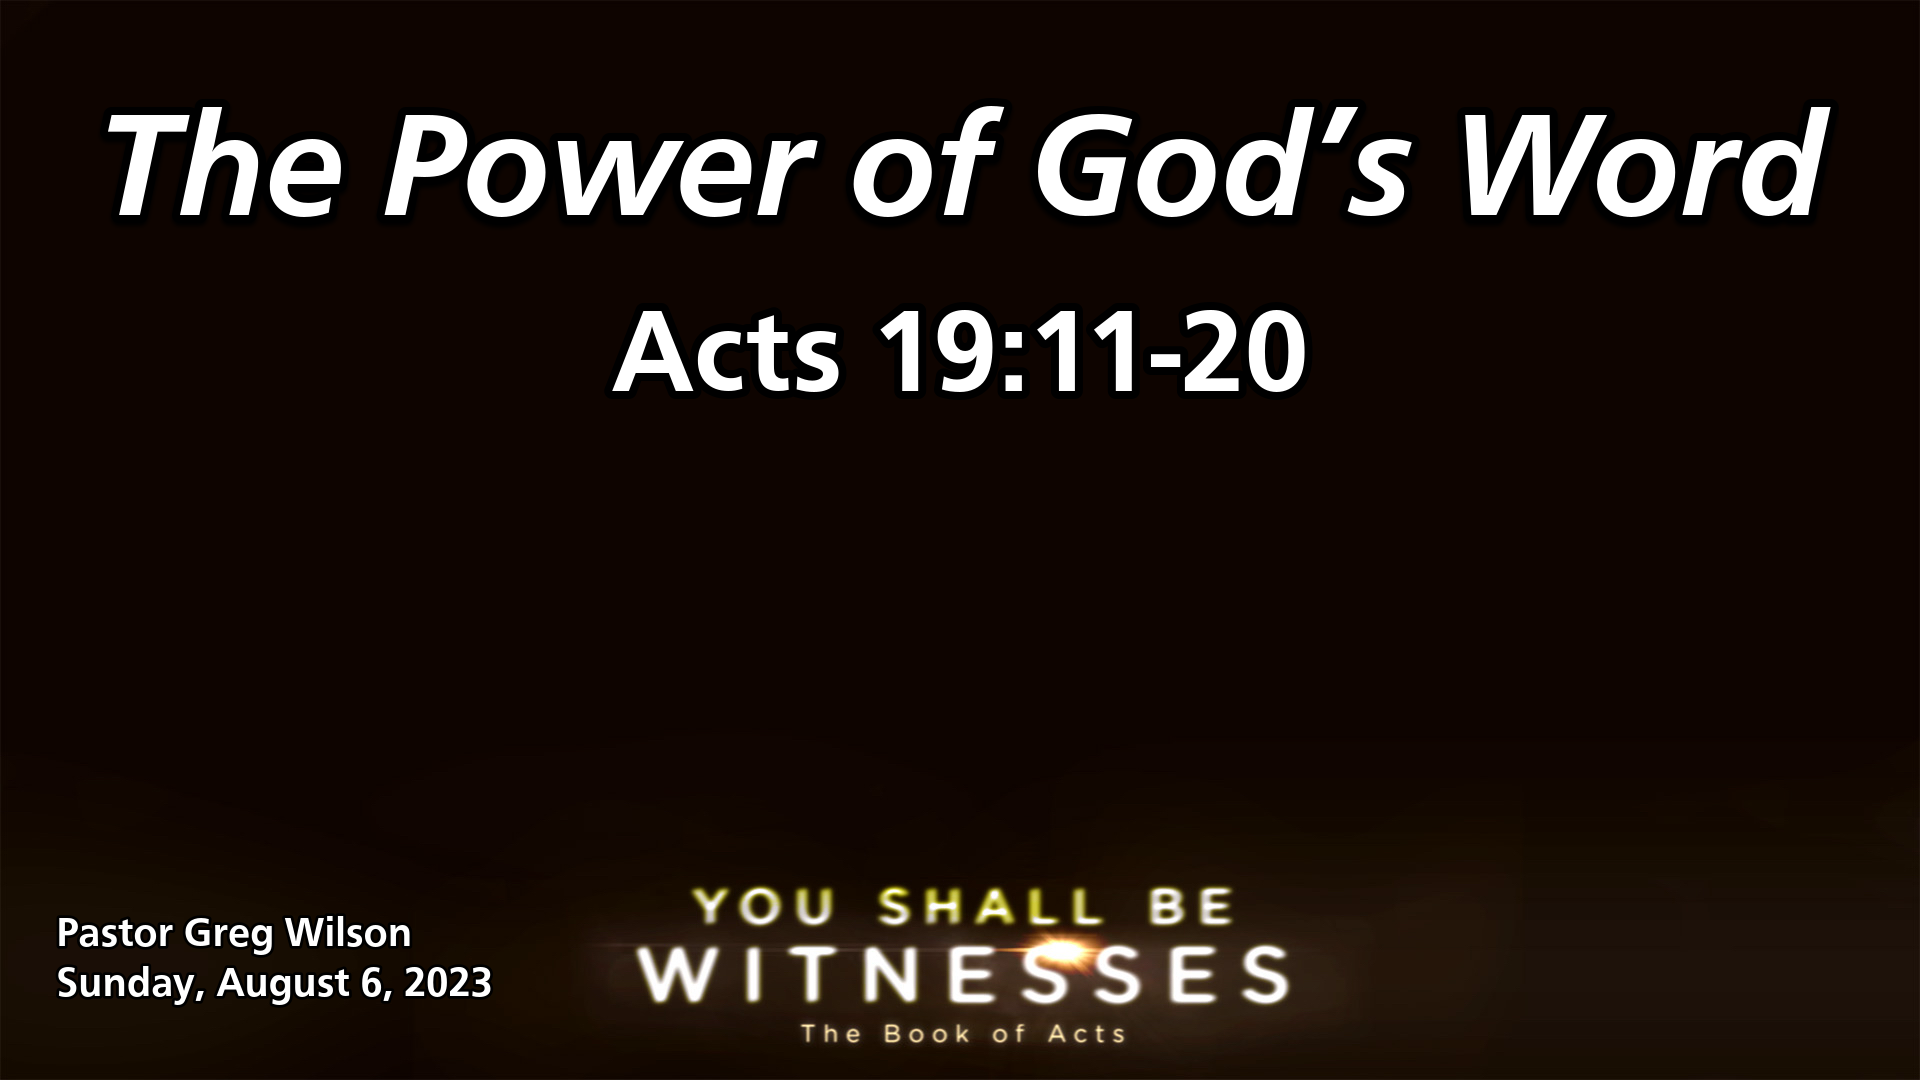 "The Power of God’s Word"